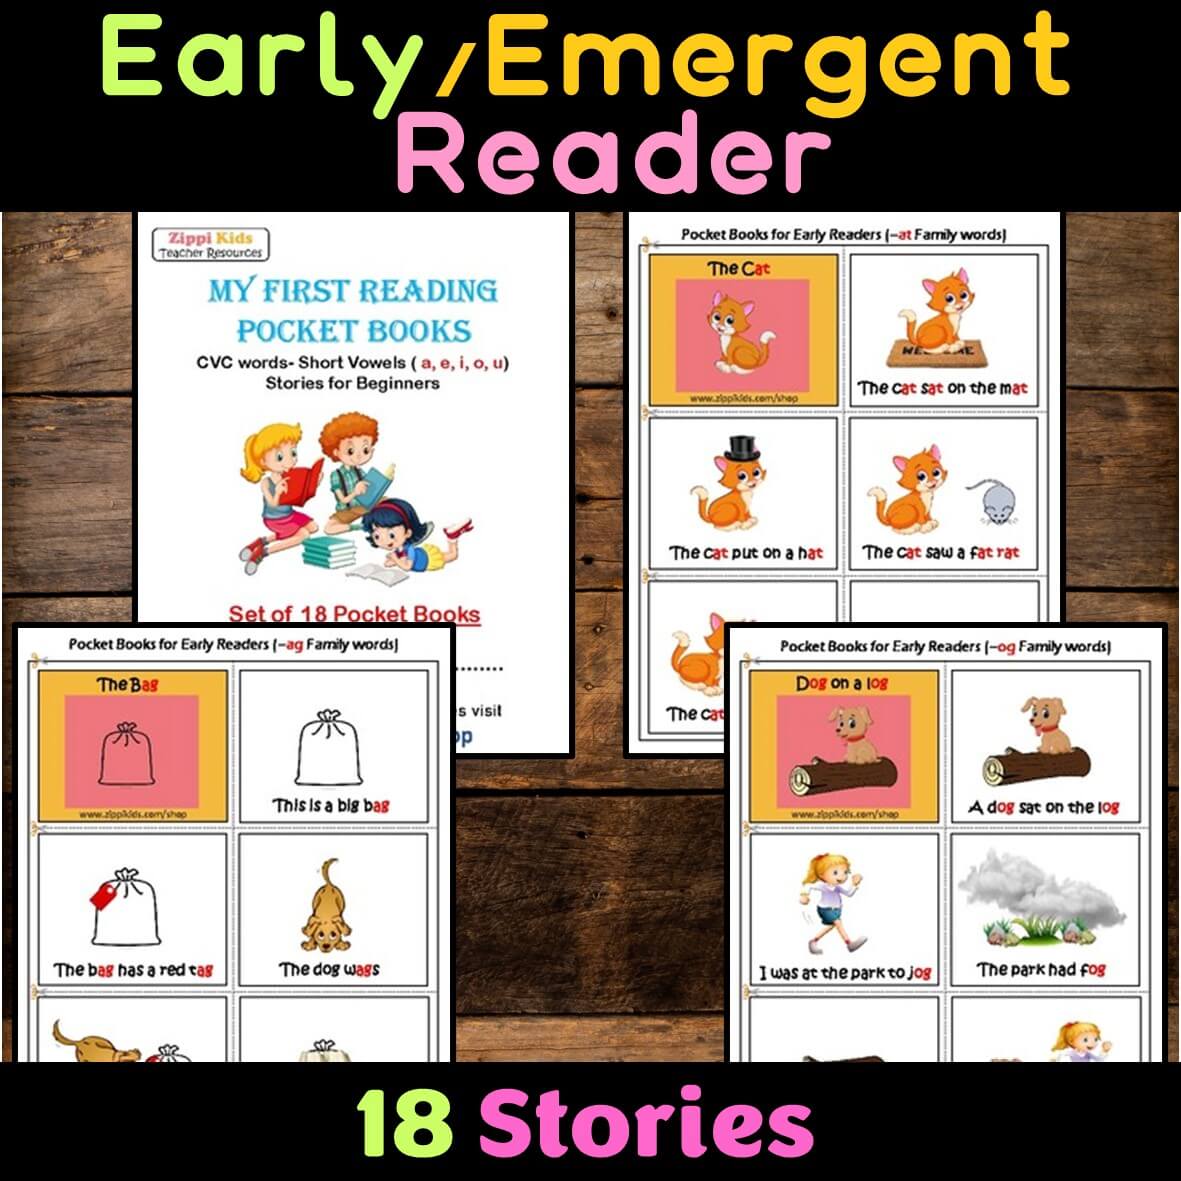 Early/ Emergent Readers, CVC words, Phonics reading, Sight Words practice